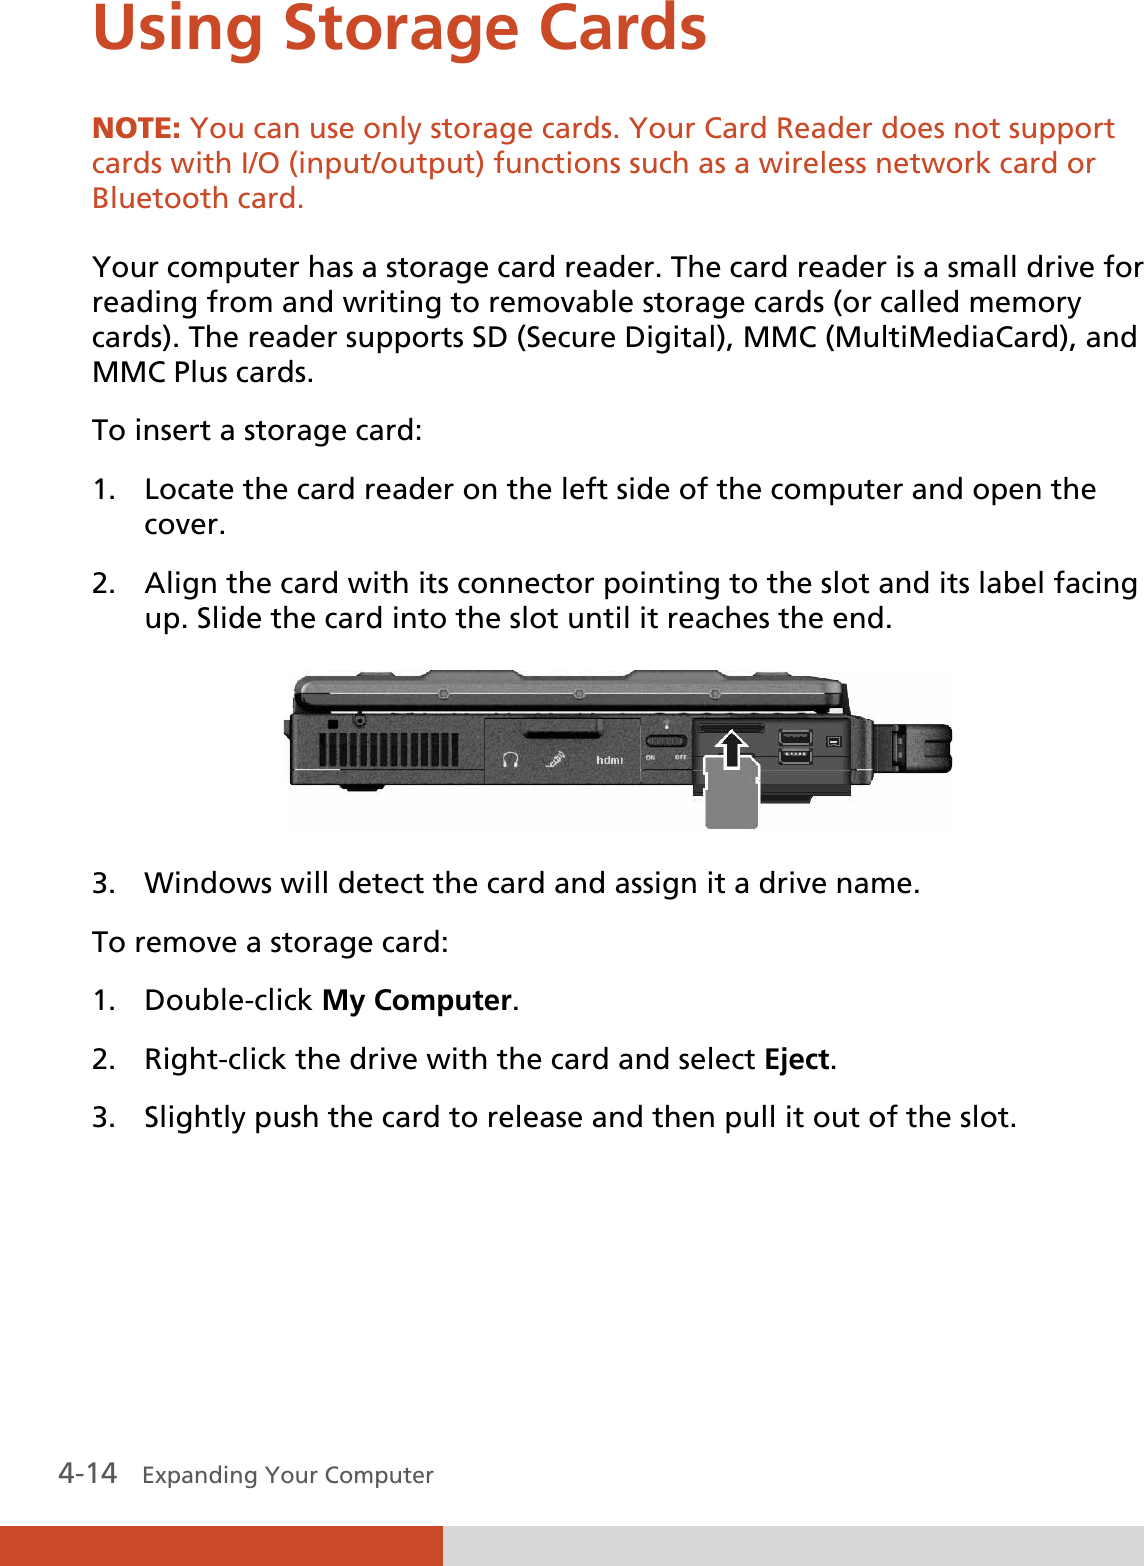  4-14   Expanding Your Computer  Using Storage Cards NOTE: You can use only storage cards. Your Card Reader does not support cards with I/O (input/output) functions such as a wireless network card or Bluetooth card.  Your computer has a storage card reader. The card reader is a small drive for reading from and writing to removable storage cards (or called memory cards). The reader supports SD (Secure Digital), MMC (MultiMediaCard), and MMC Plus cards. To insert a storage card: 1. Locate the card reader on the left side of the computer and open the cover. 2. Align the card with its connector pointing to the slot and its label facing up. Slide the card into the slot until it reaches the end.  3. Windows will detect the card and assign it a drive name. To remove a storage card: 1. Double-click My Computer. 2. Right-click the drive with the card and select Eject. 3. Slightly push the card to release and then pull it out of the slot. 